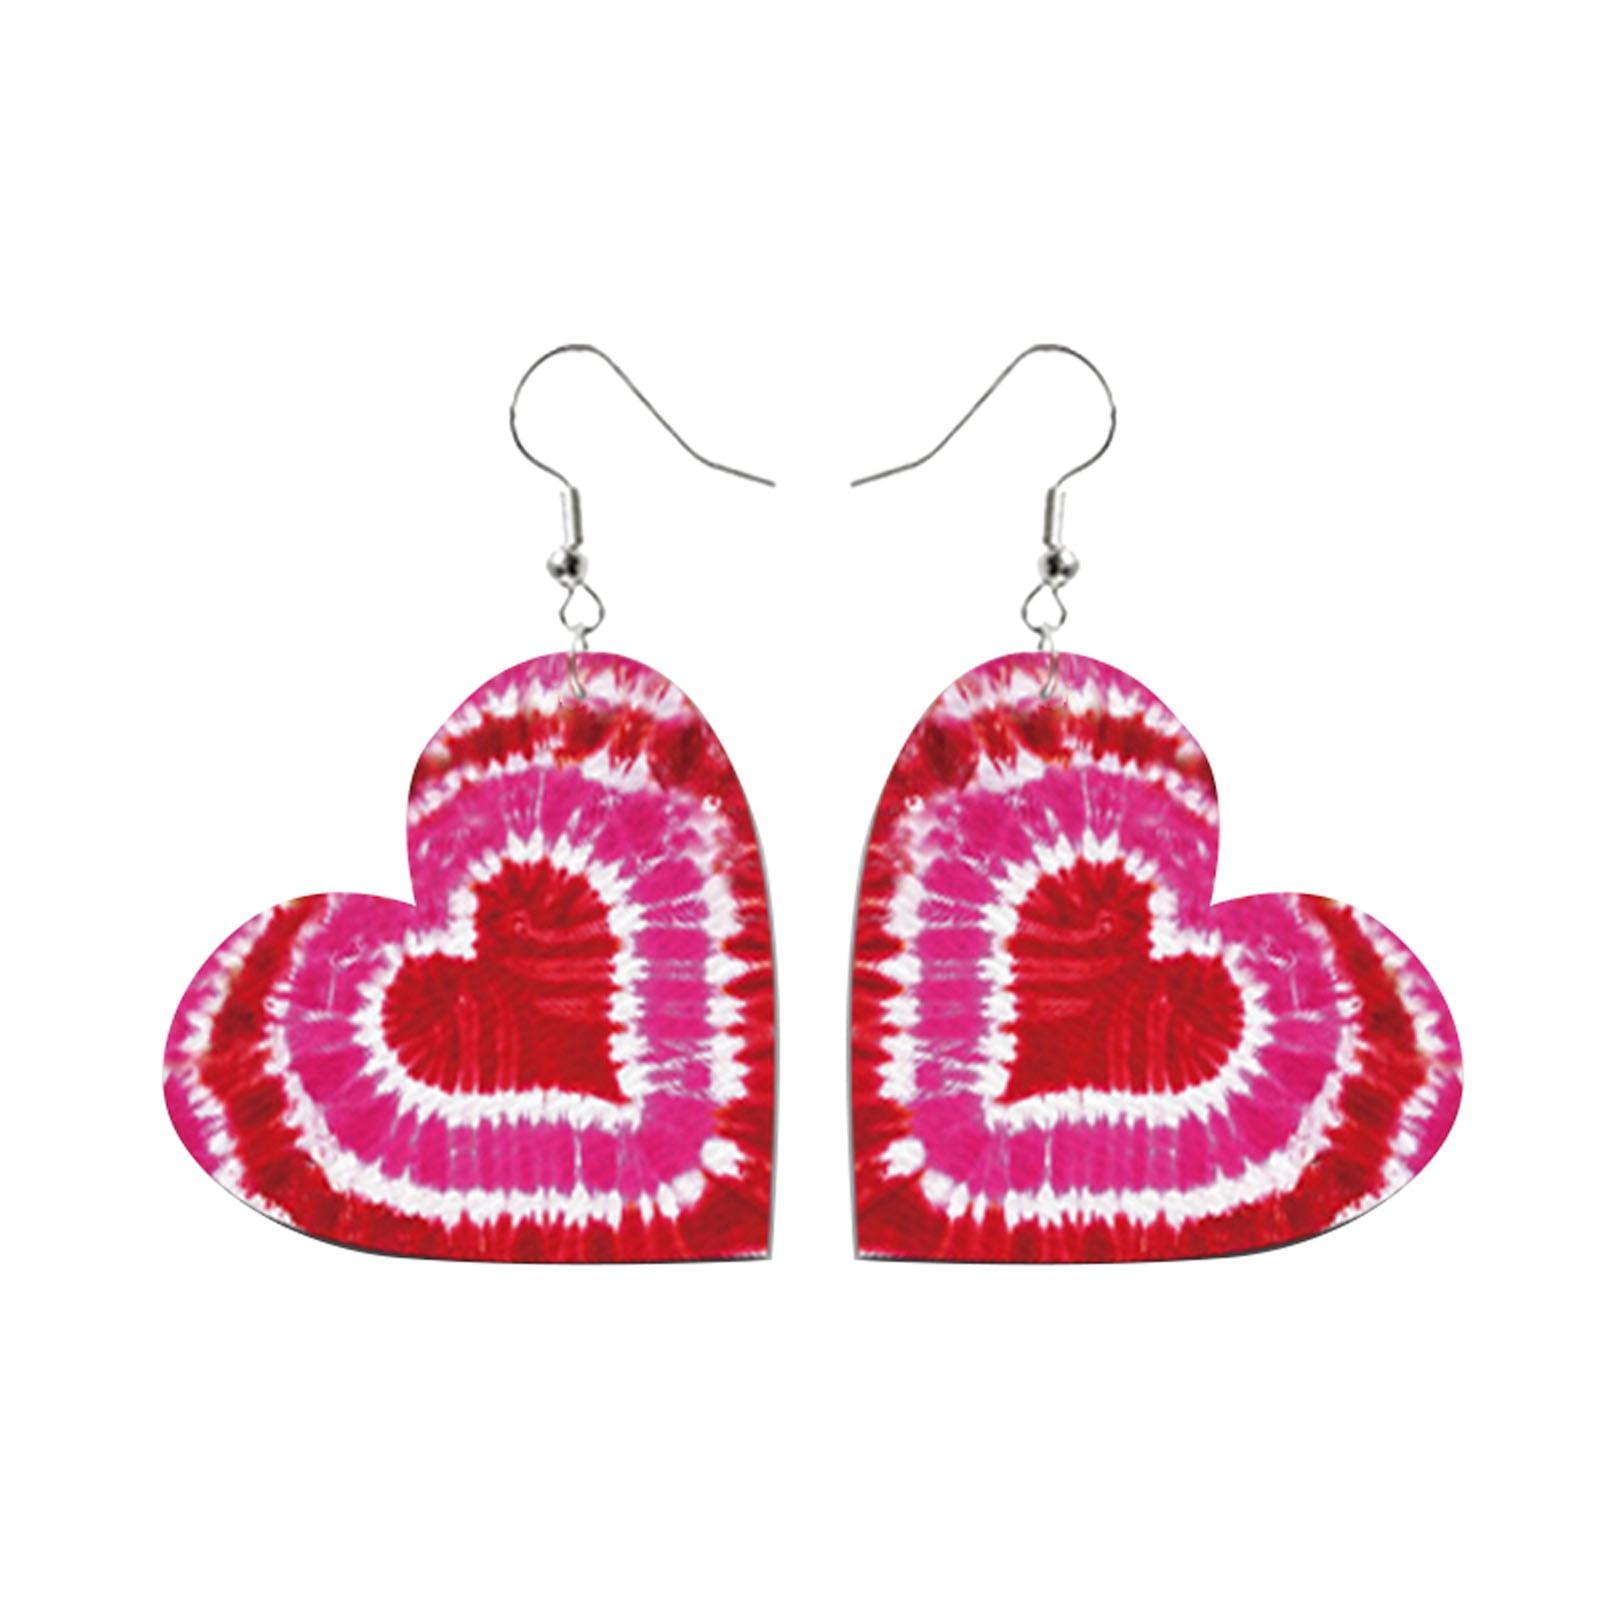 Giving Earrings - Heart and Ribbon